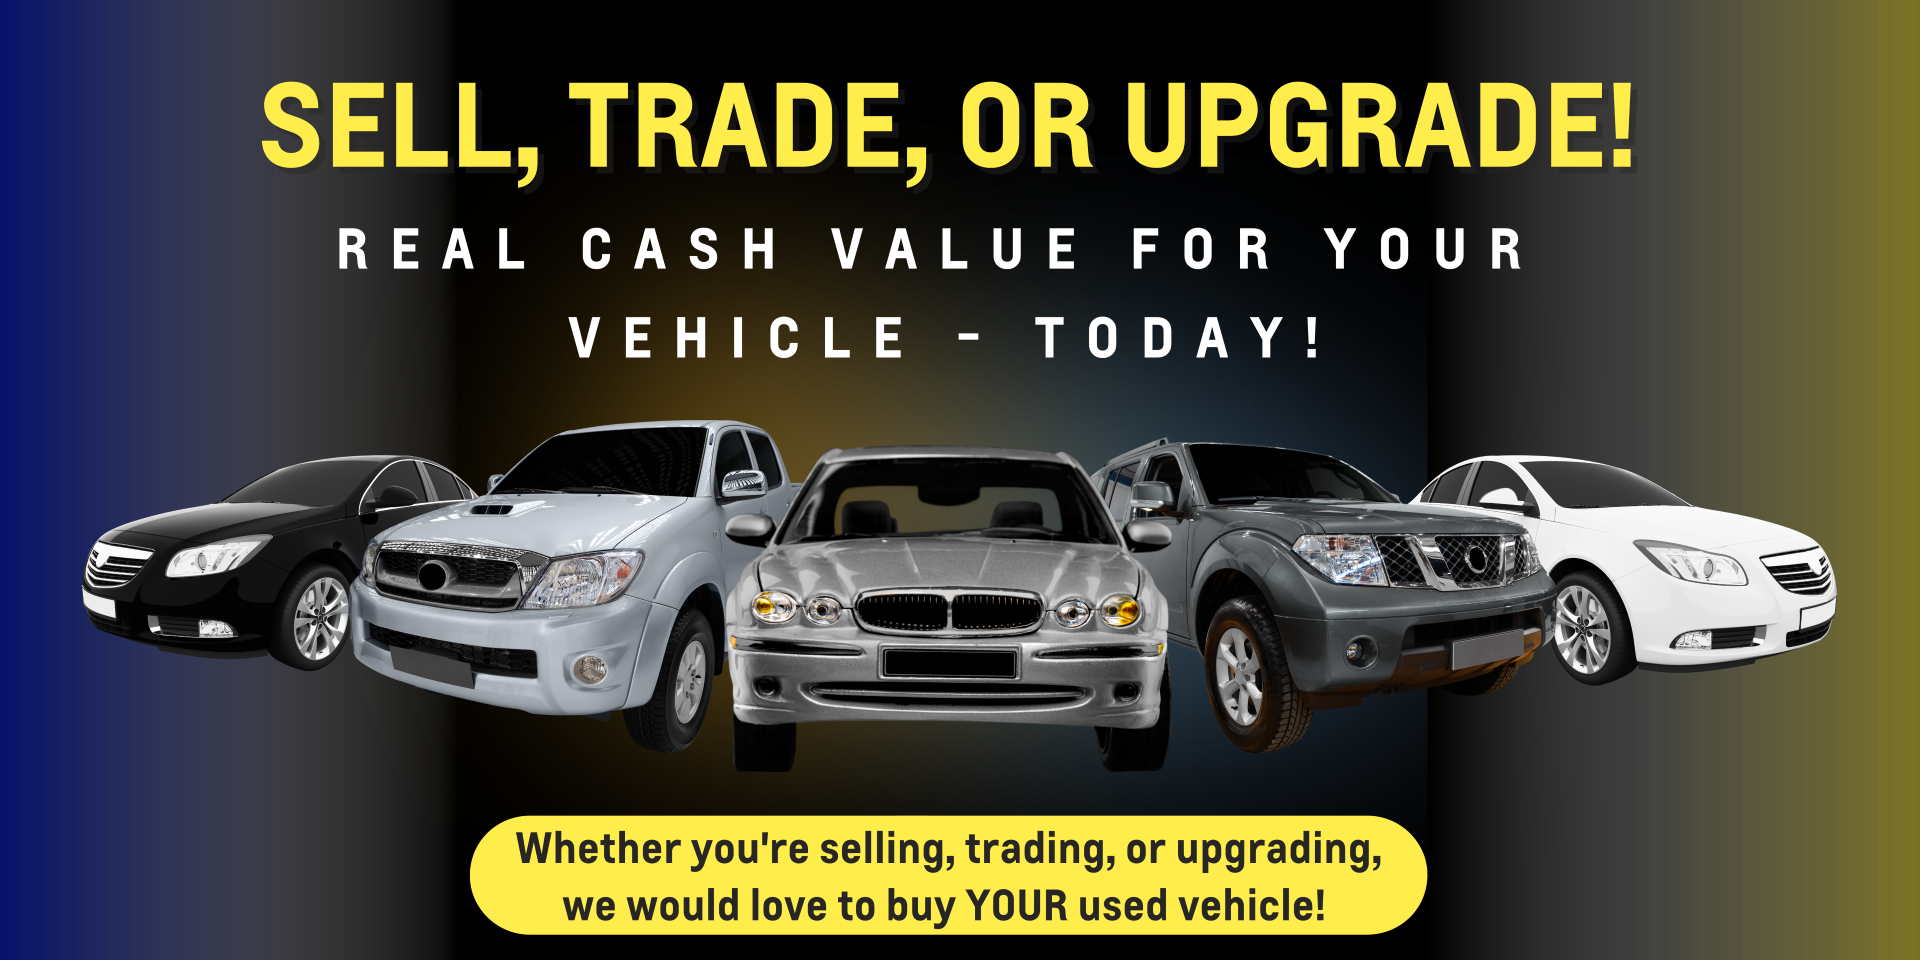 Sale, Trade, or Upgrade! Real Cash Value For Your Vehcile Today!Sheboygan Auto Group in Sheboygan WI